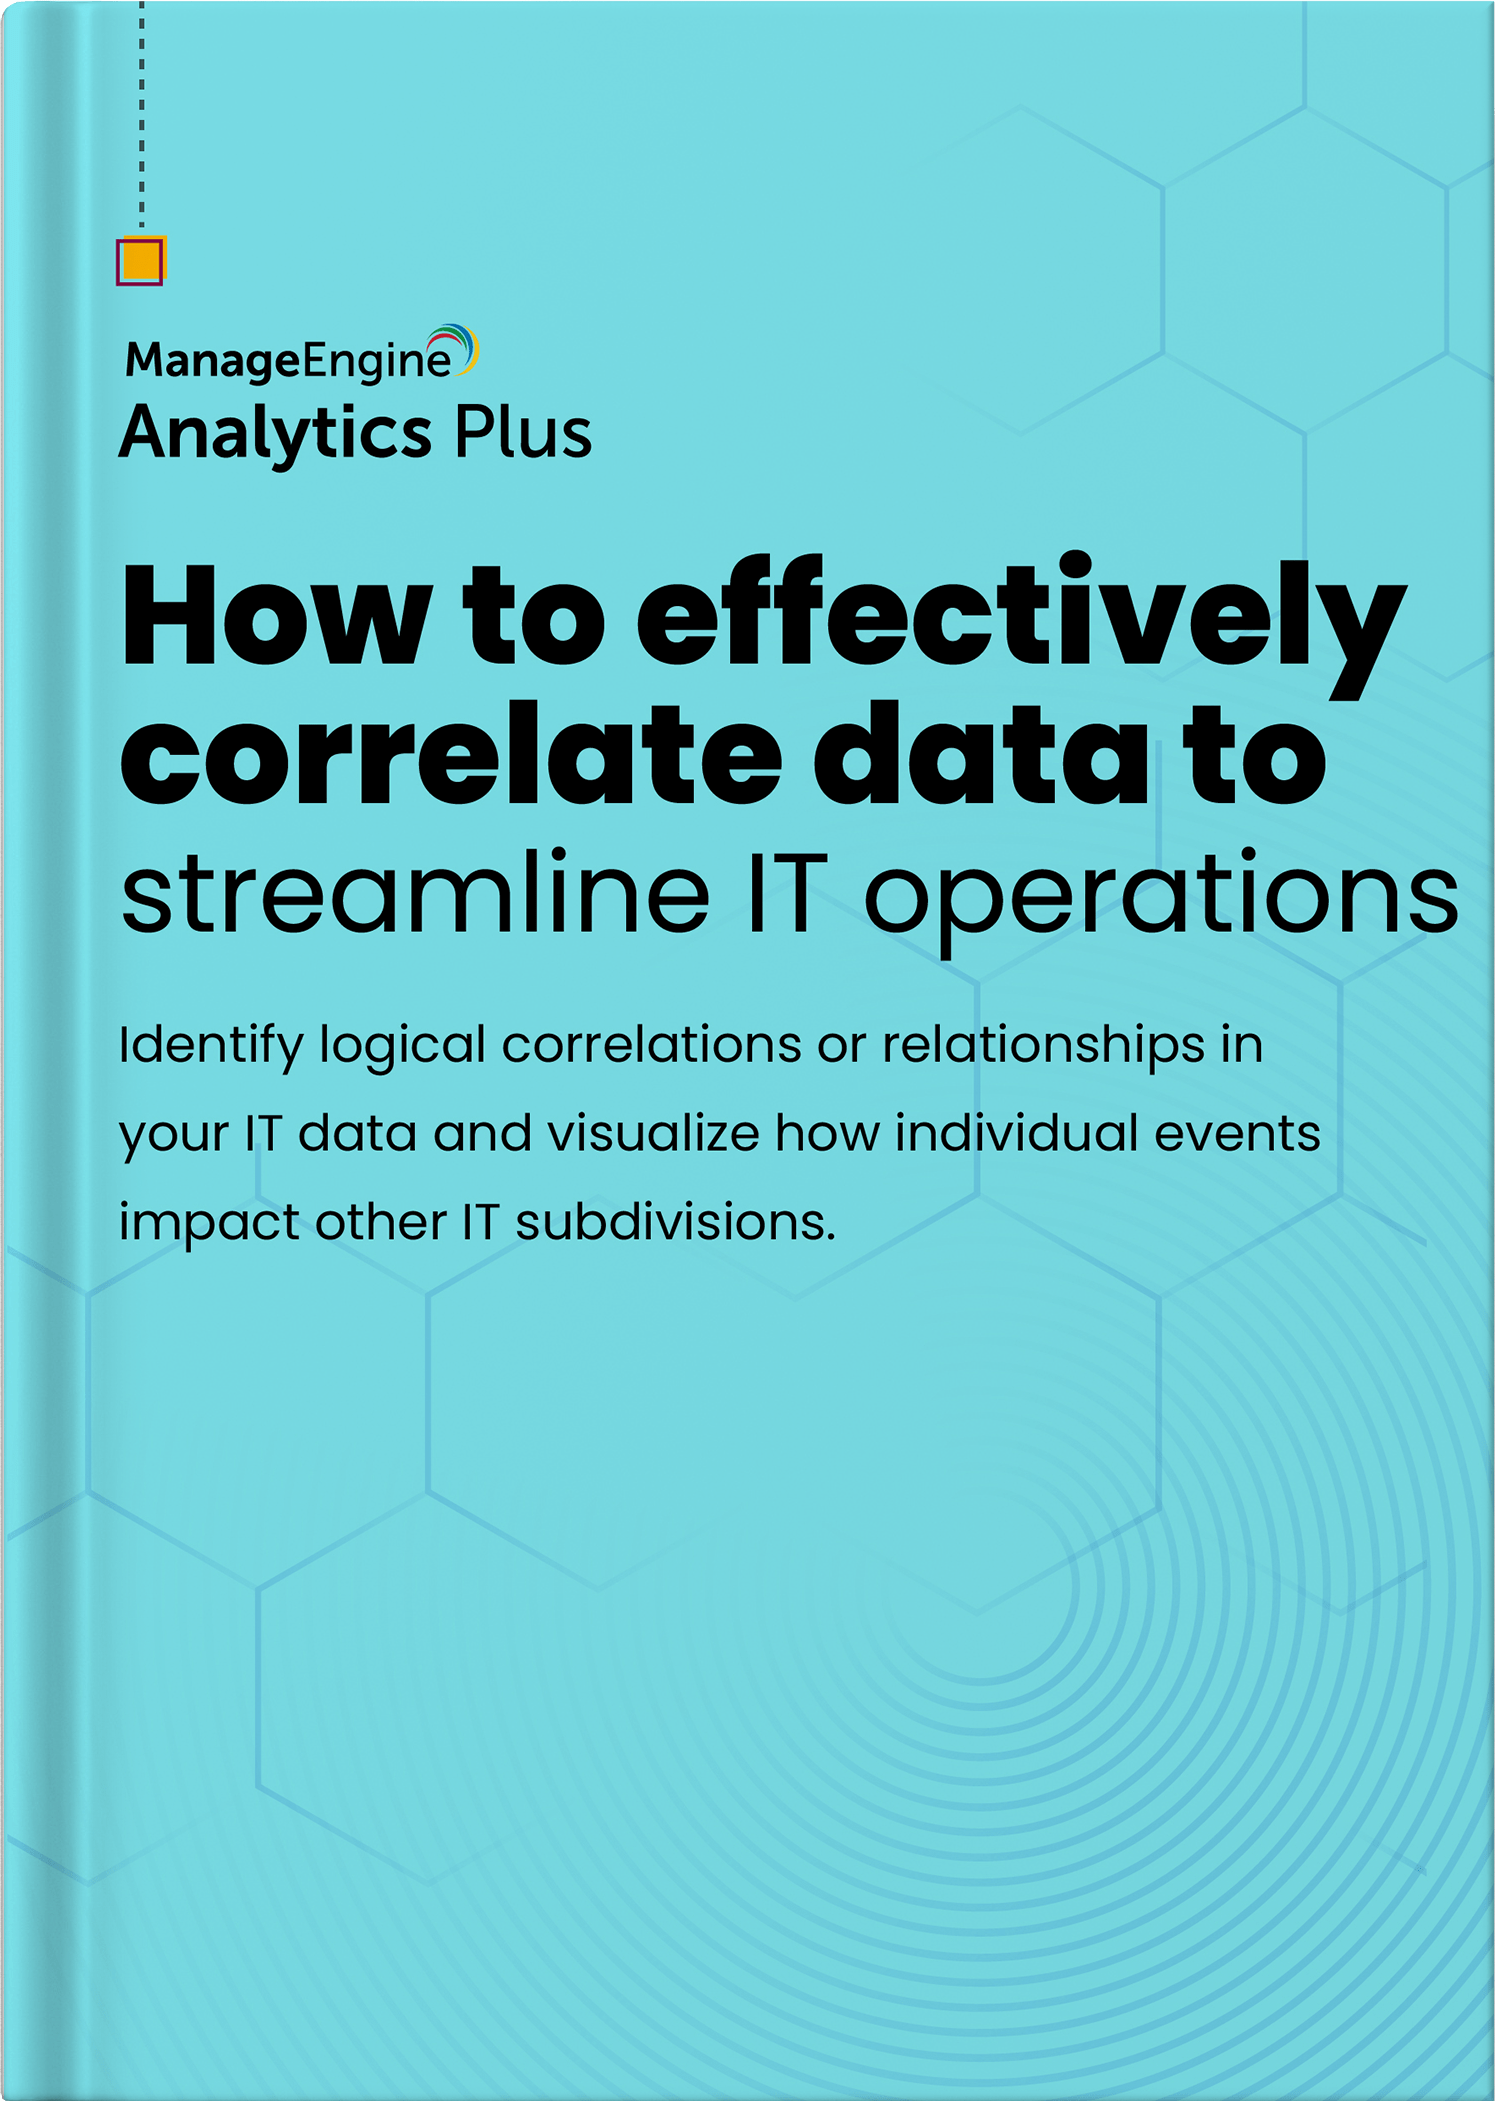 How to effectively correlate data to streamline IT operations